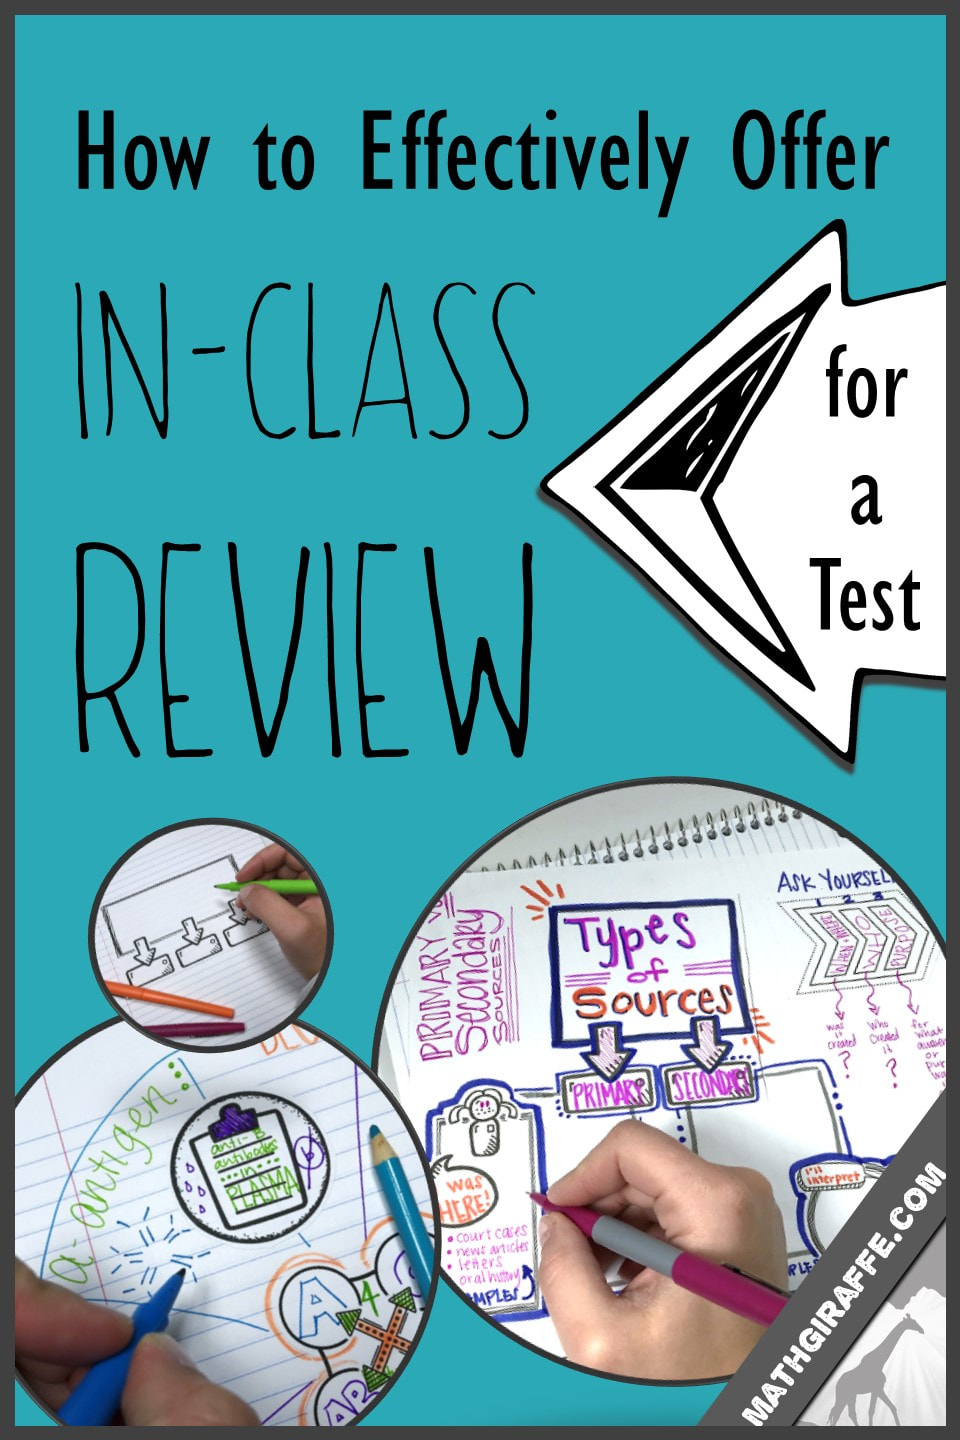 How to Structure a Productive In-Class Review Day for Tests or Quizzes